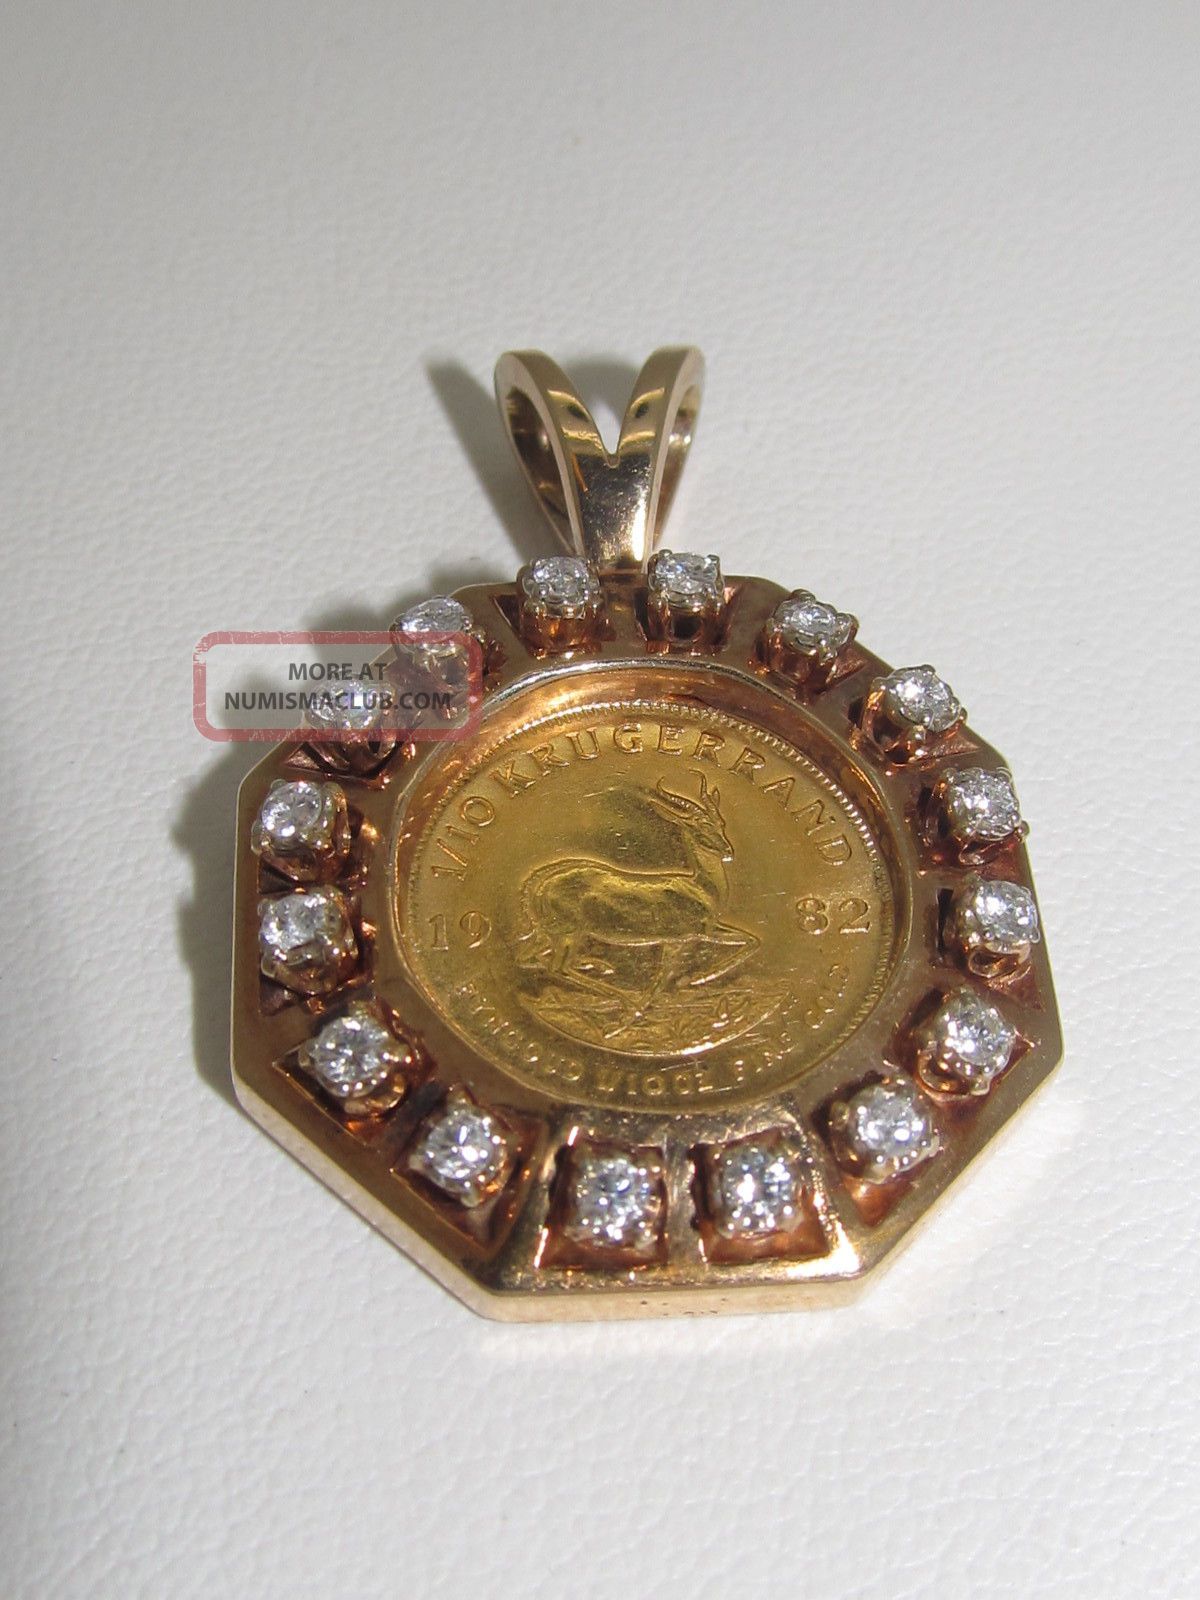 1982 1/10 Ounce Krugerrand Mounted In 14k Pendant With 16 Diamonds